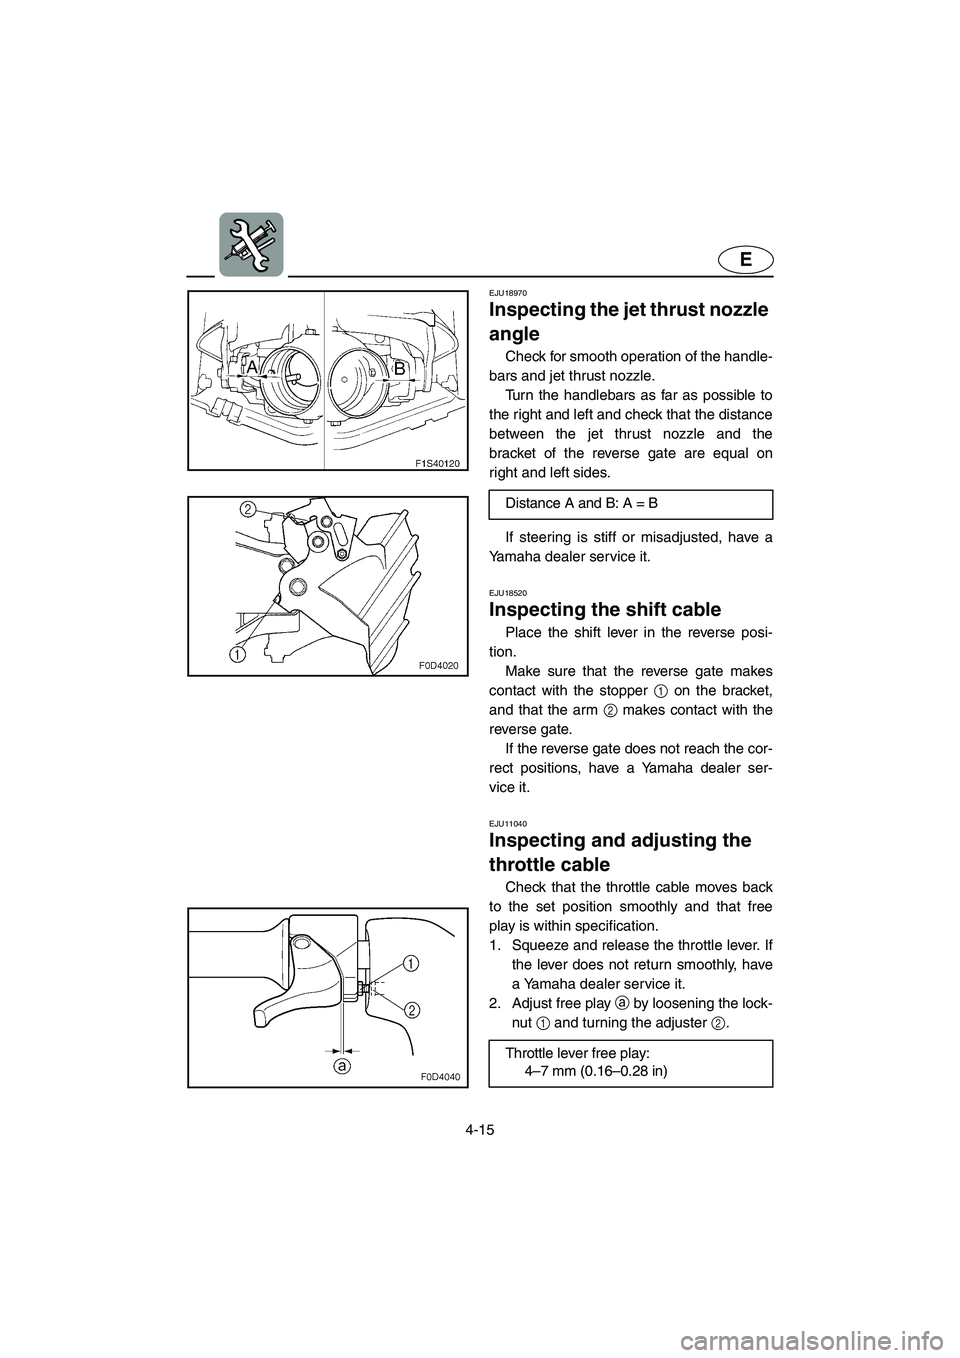 YAMAHA FX HO 2006  Owners Manual 4-15
E
EJU18970 
Inspecting the jet thrust nozzle 
angle 
Check for smooth operation of the handle-
bars and jet thrust nozzle. 
Turn the handlebars as far as possible to
the right and left and check 